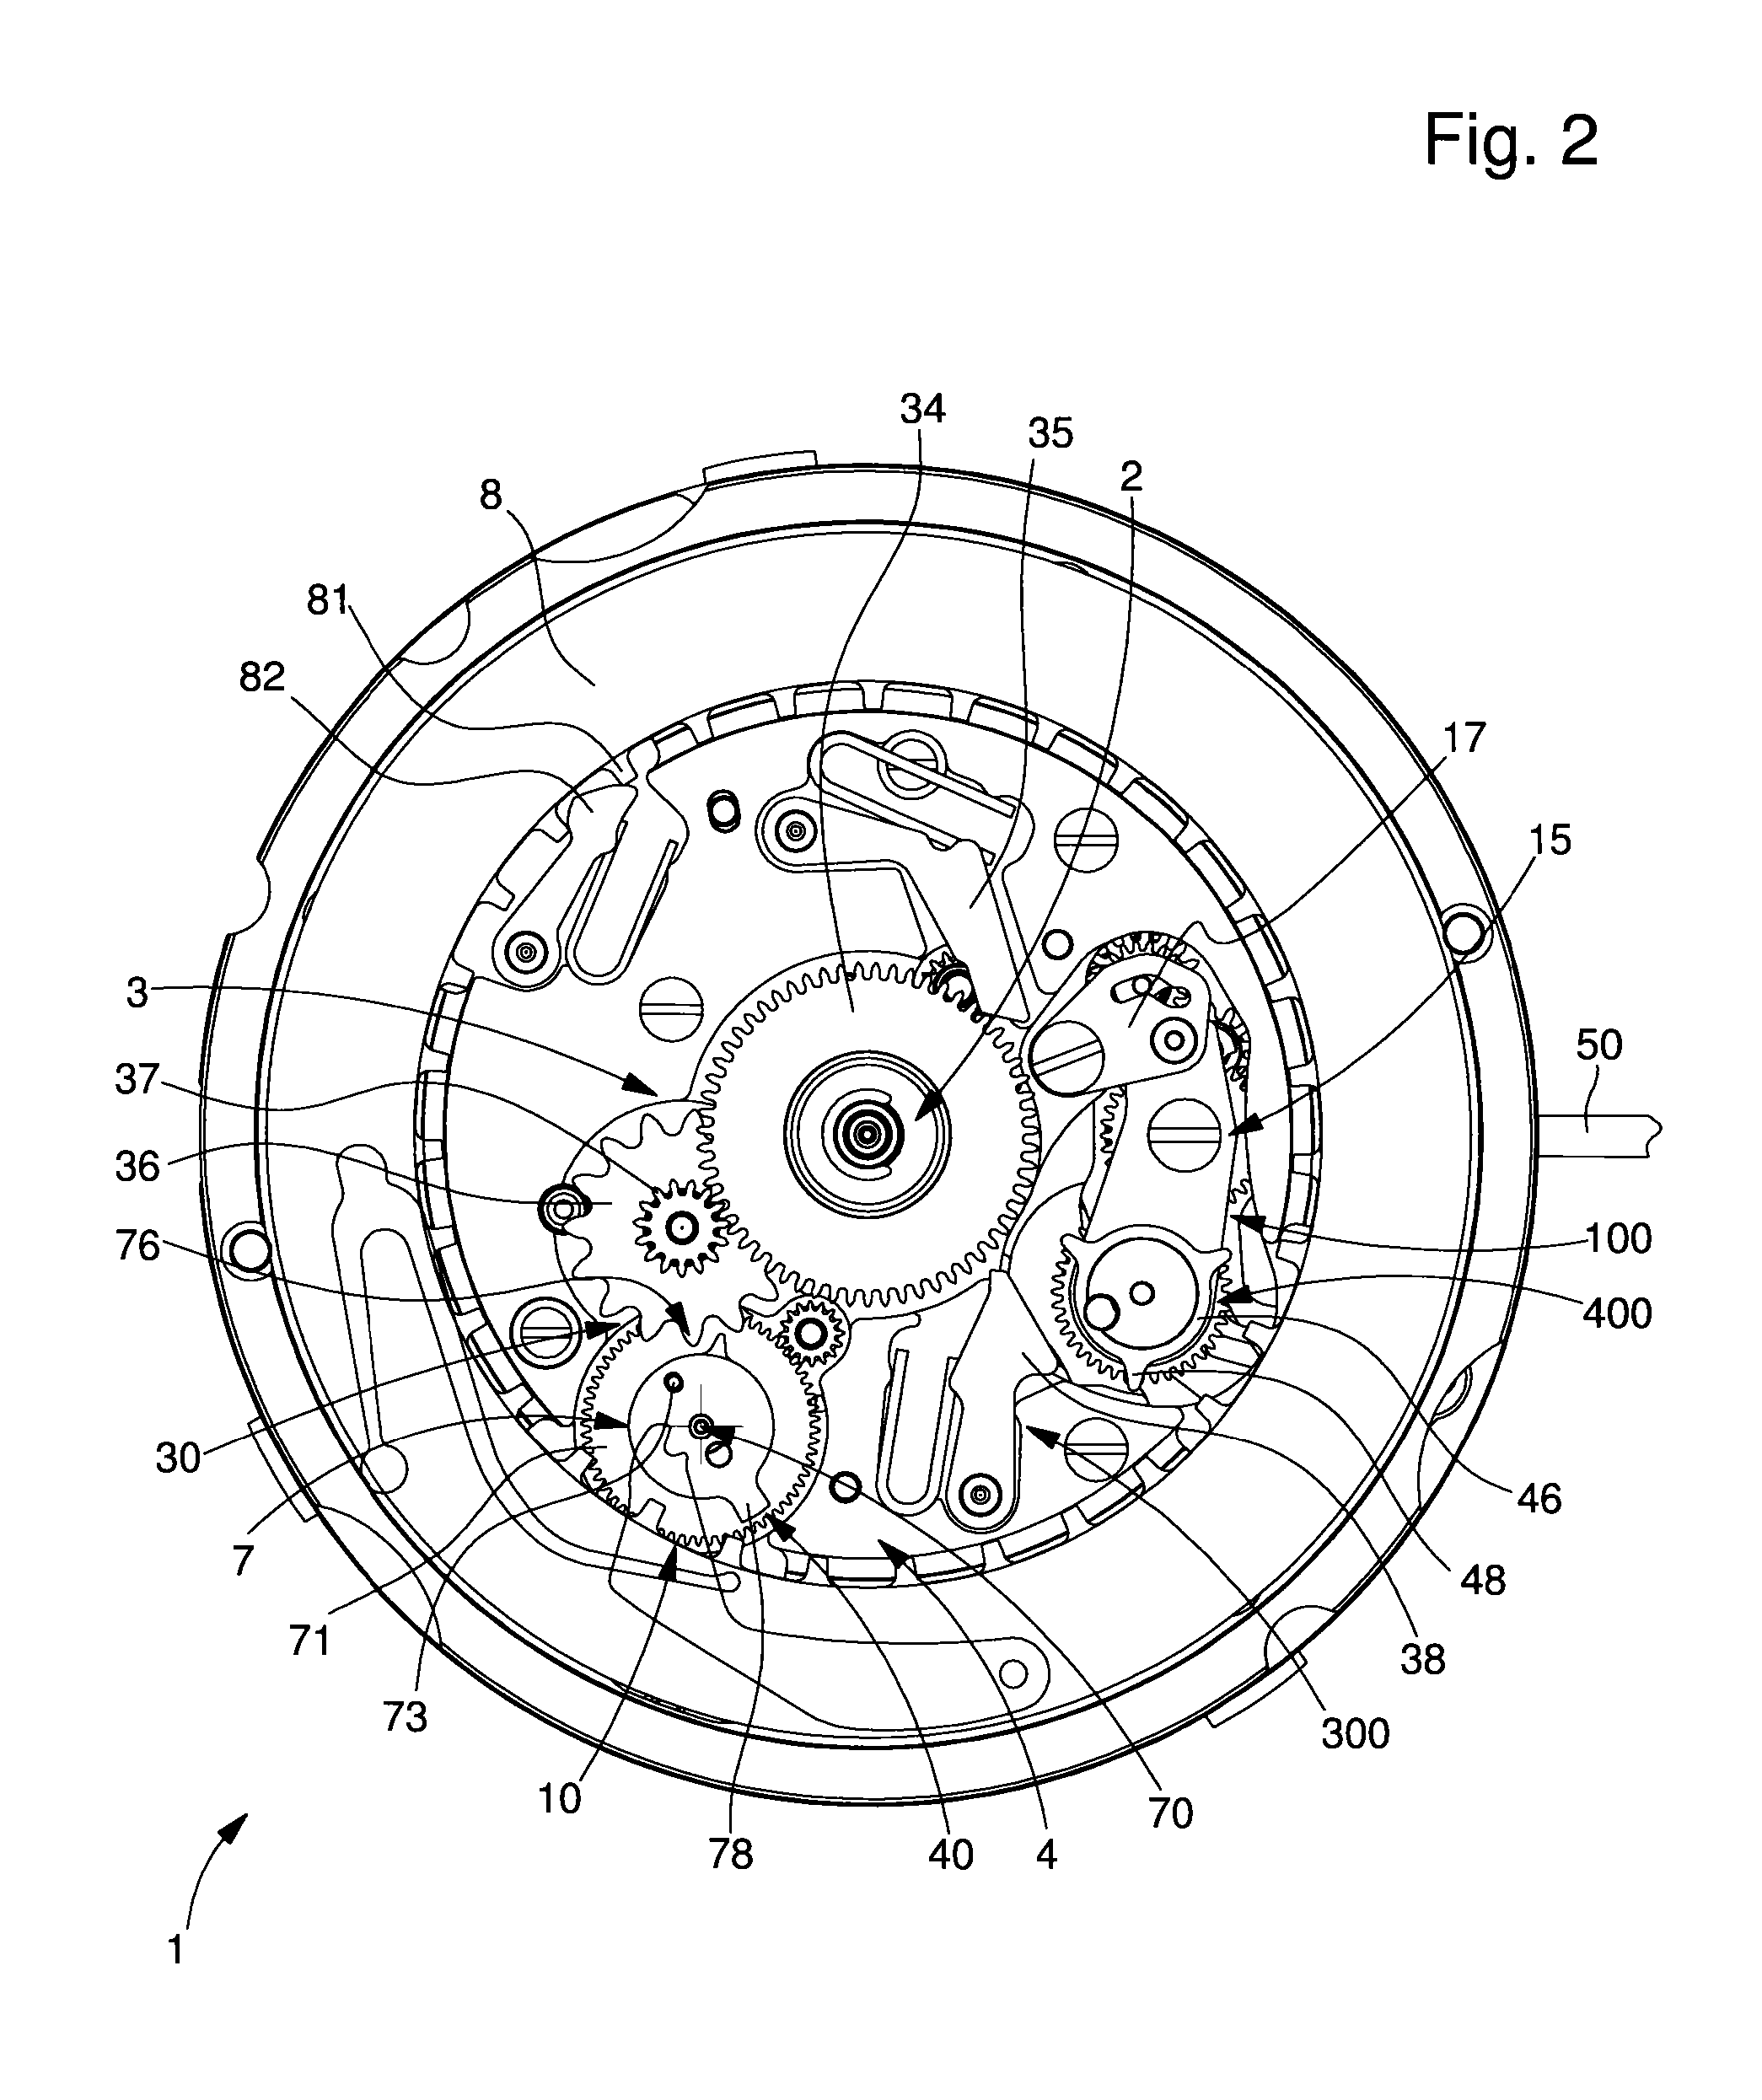 Mechanism for displaying and correcting the state of two different time measurable quantities